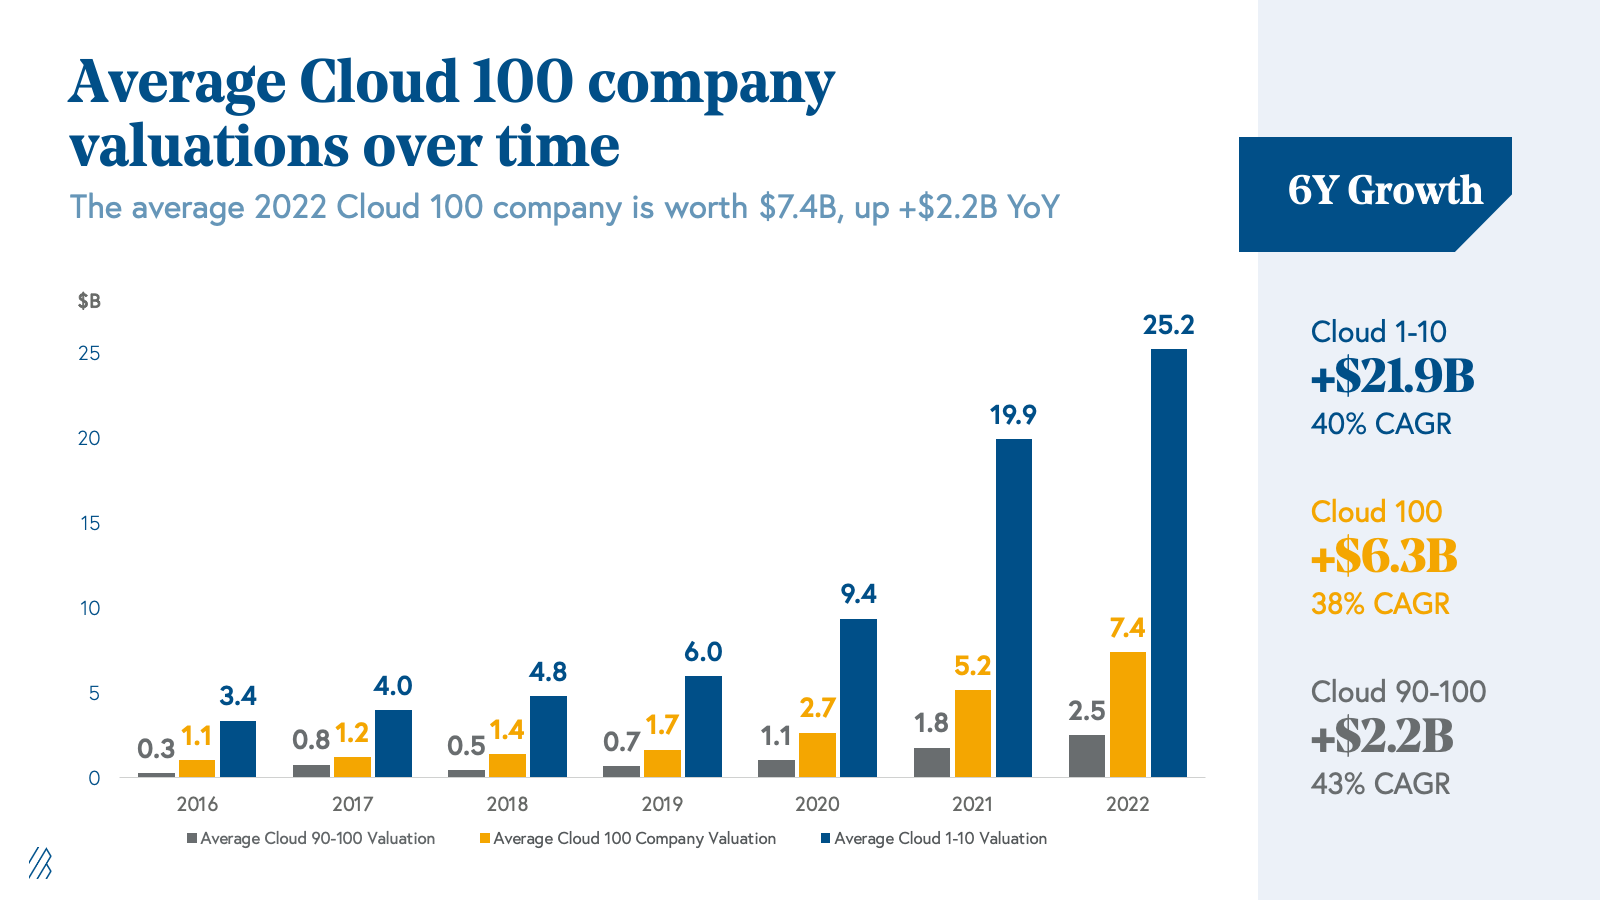 Average Cloud 100 company valuations over time